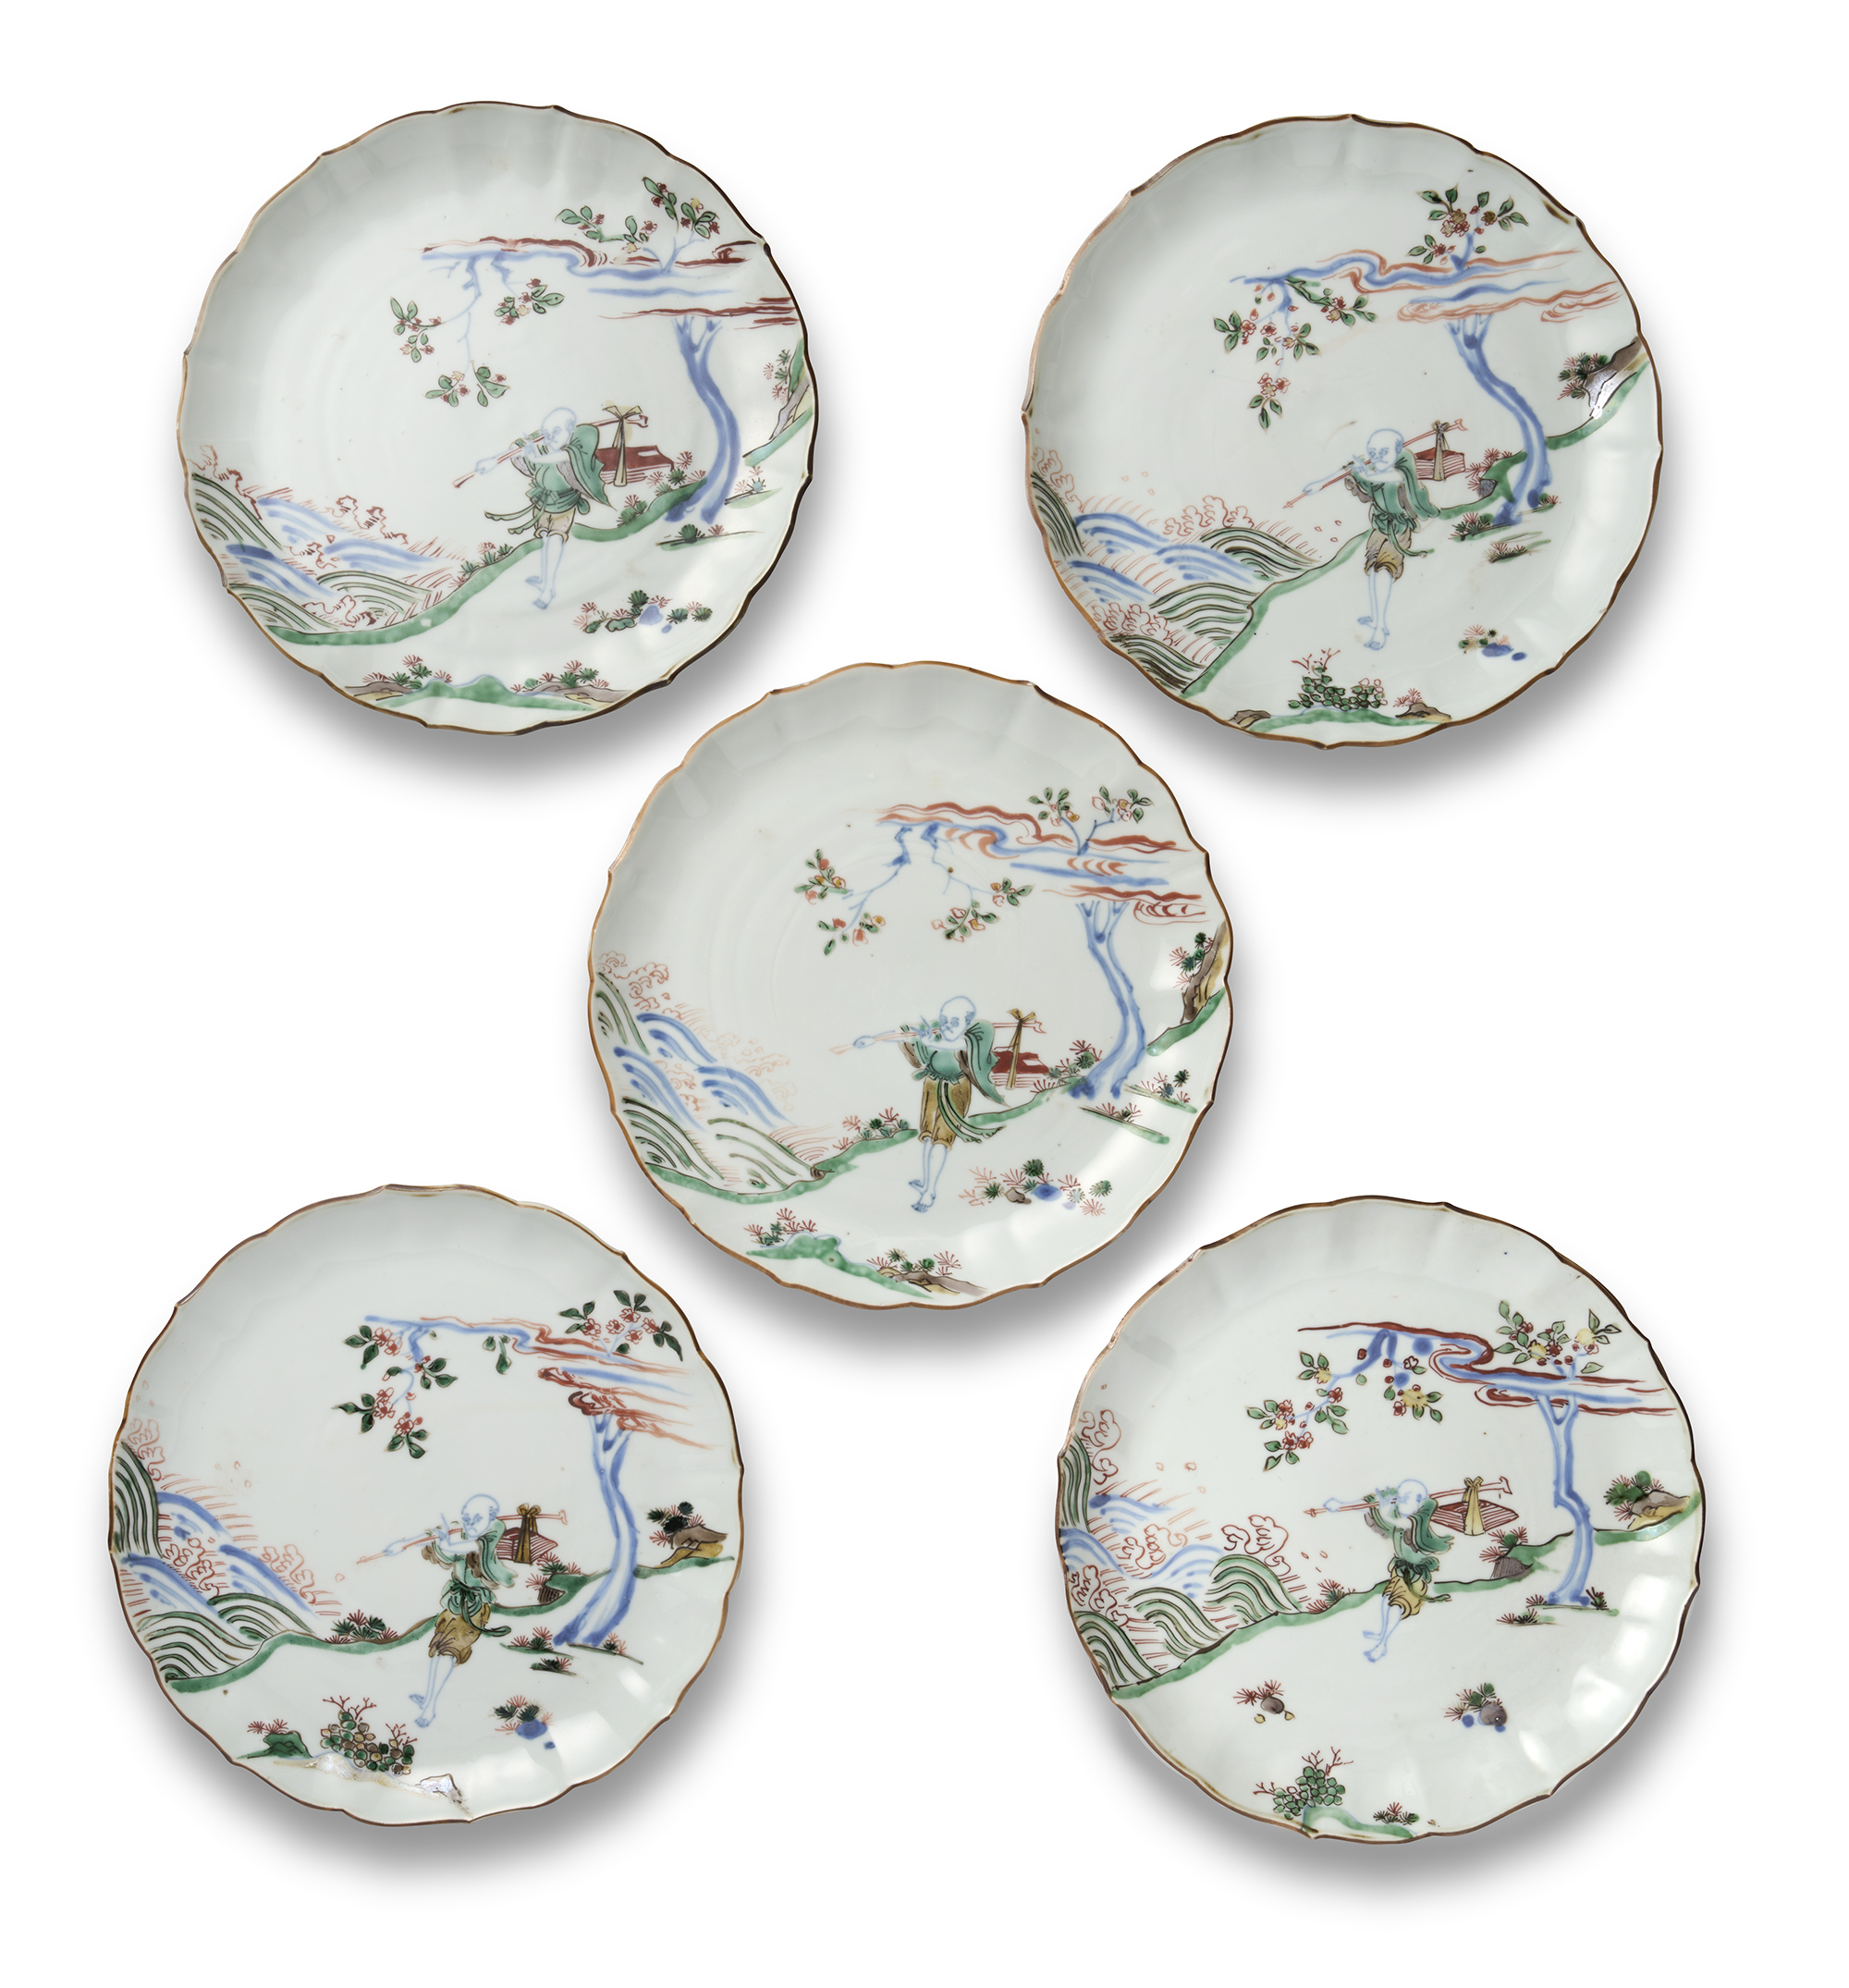 A SET OF FIVE CHINESE UNDERGLAZE-BLUE AND ENAMELLED SERVING DISHES, CHONGZHEN PERIOD, 1628 - 1644